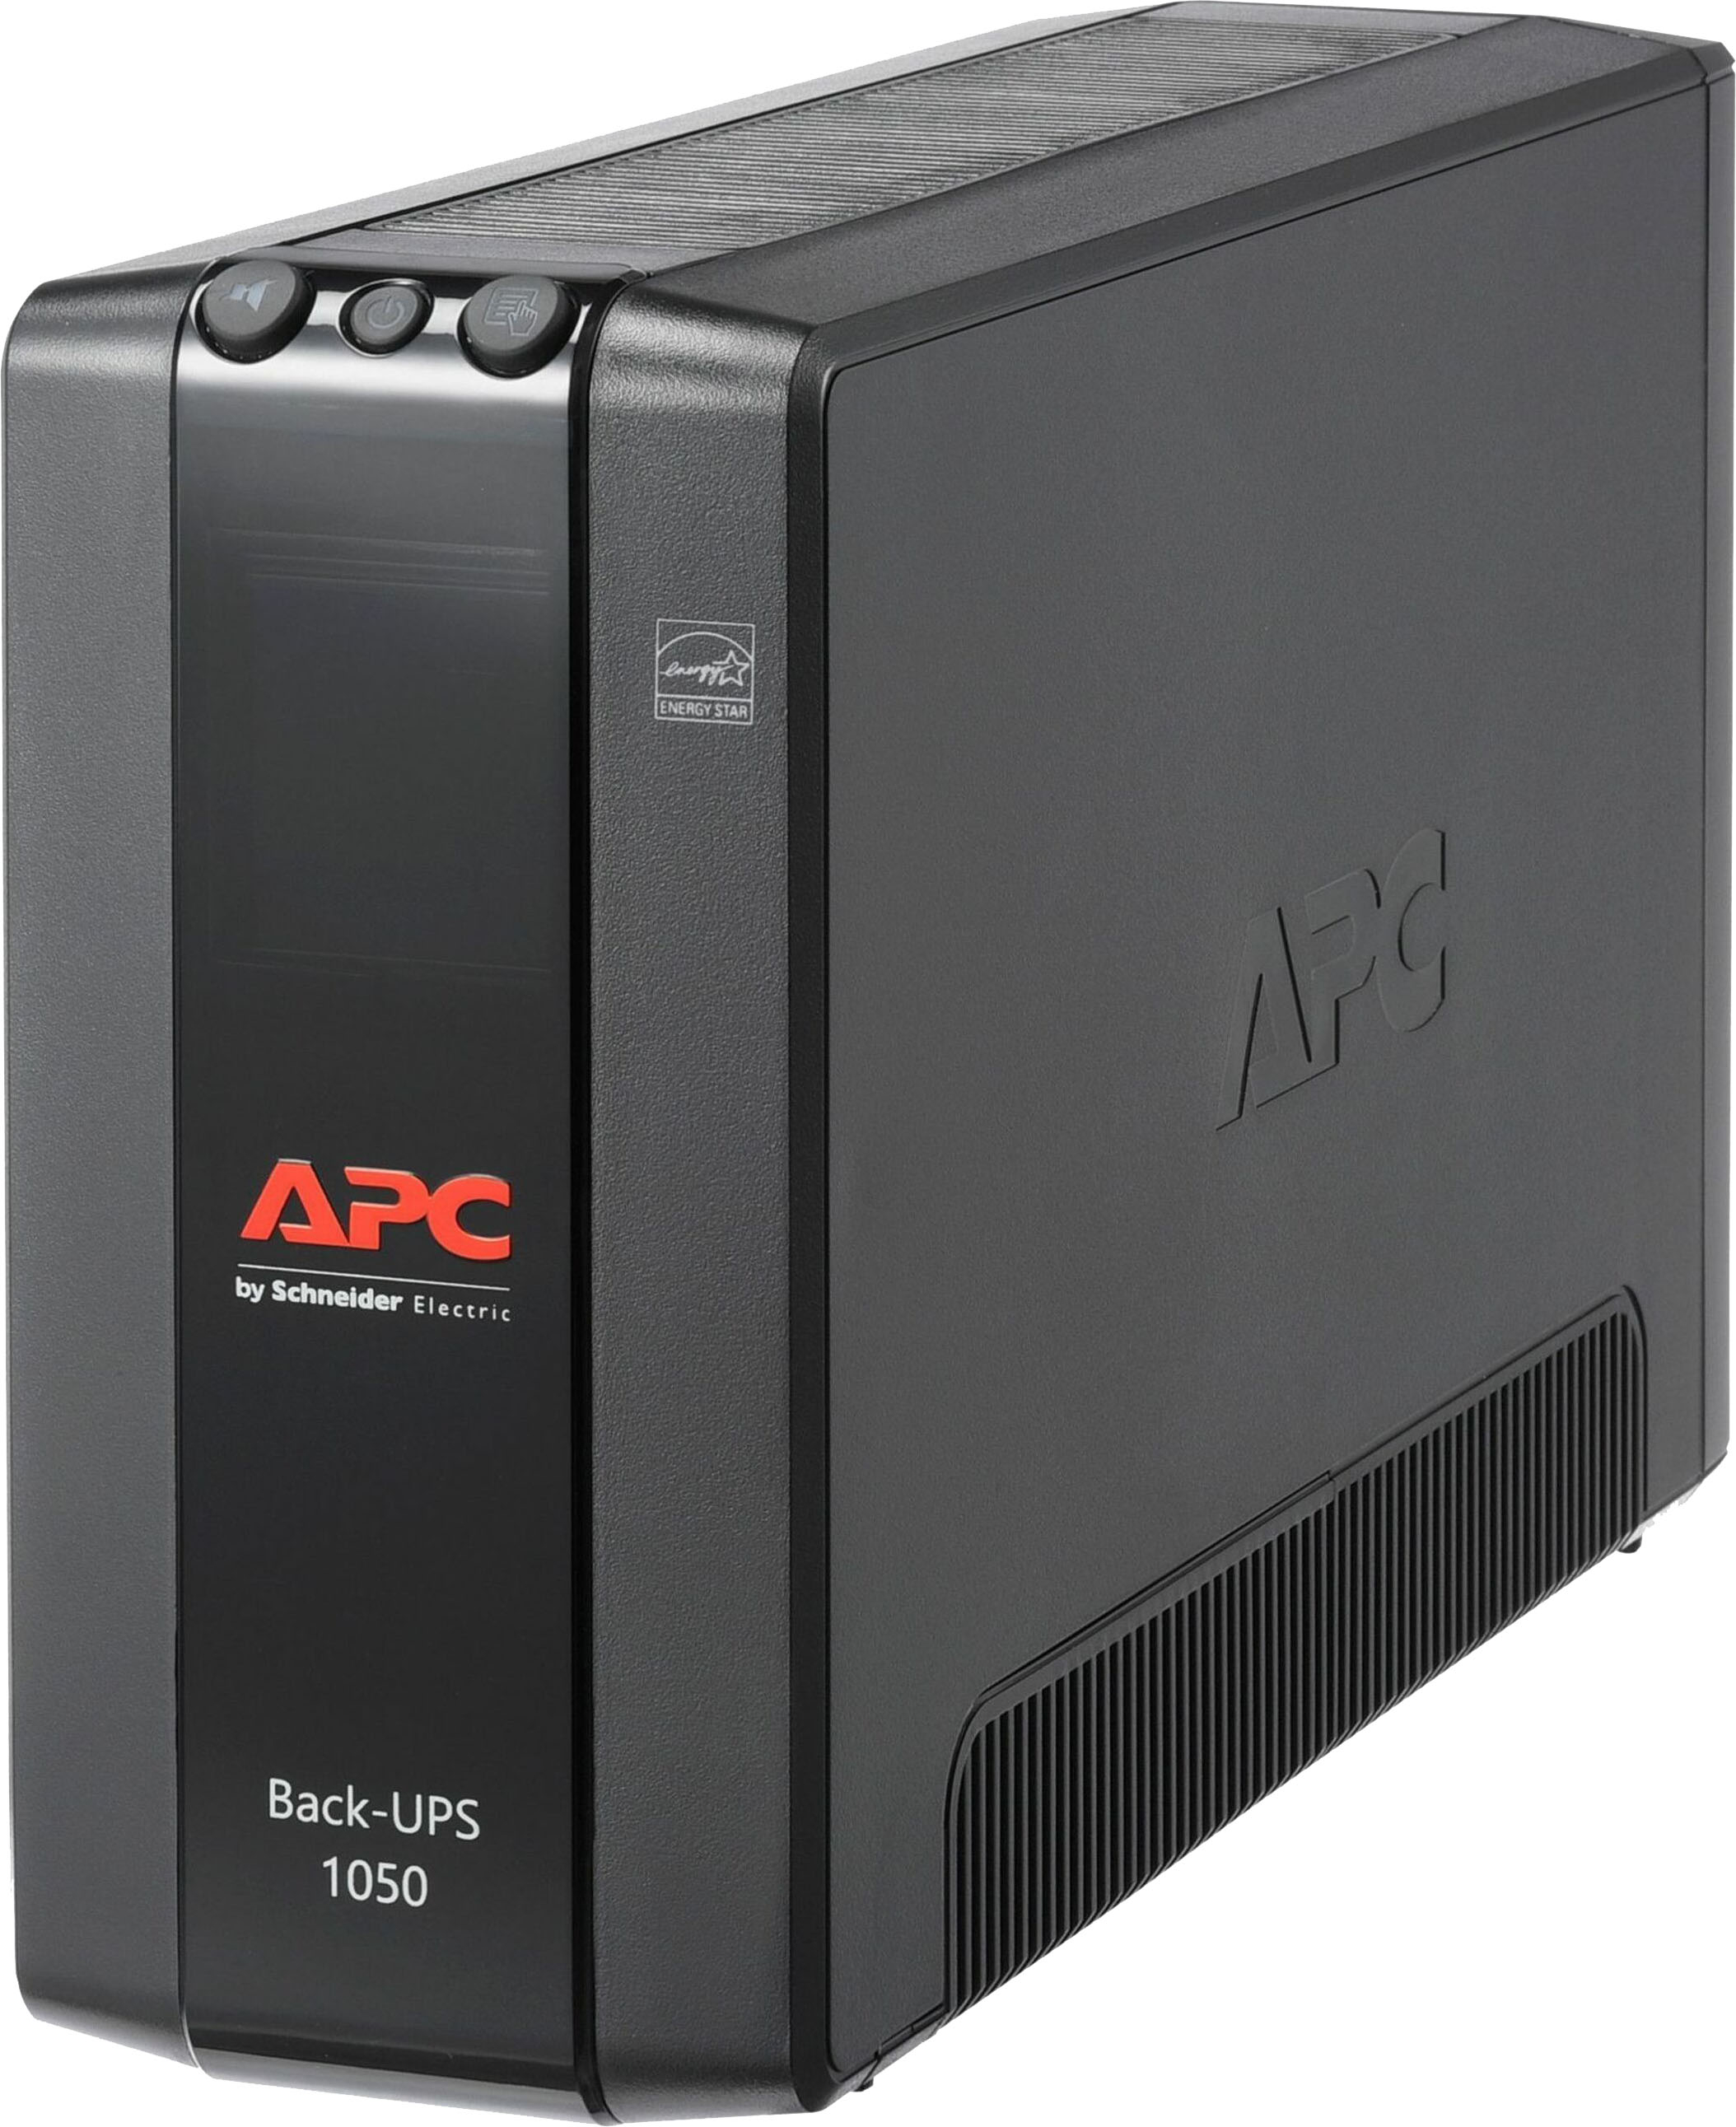 How To Get The Most Information Out Of Your APC UPS Devices